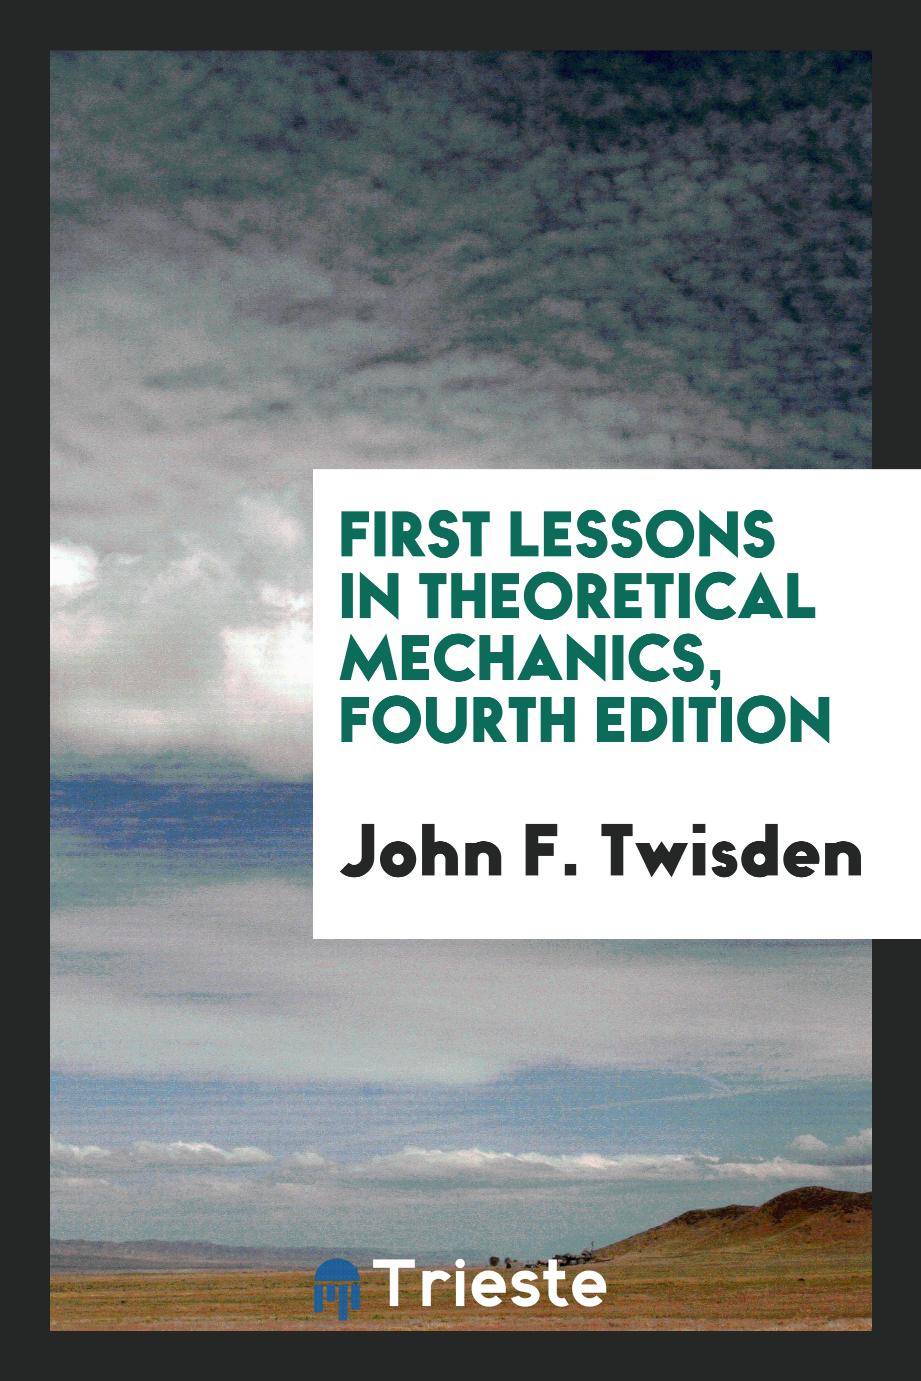 First lessons in theoretical mechanics, fourth edition